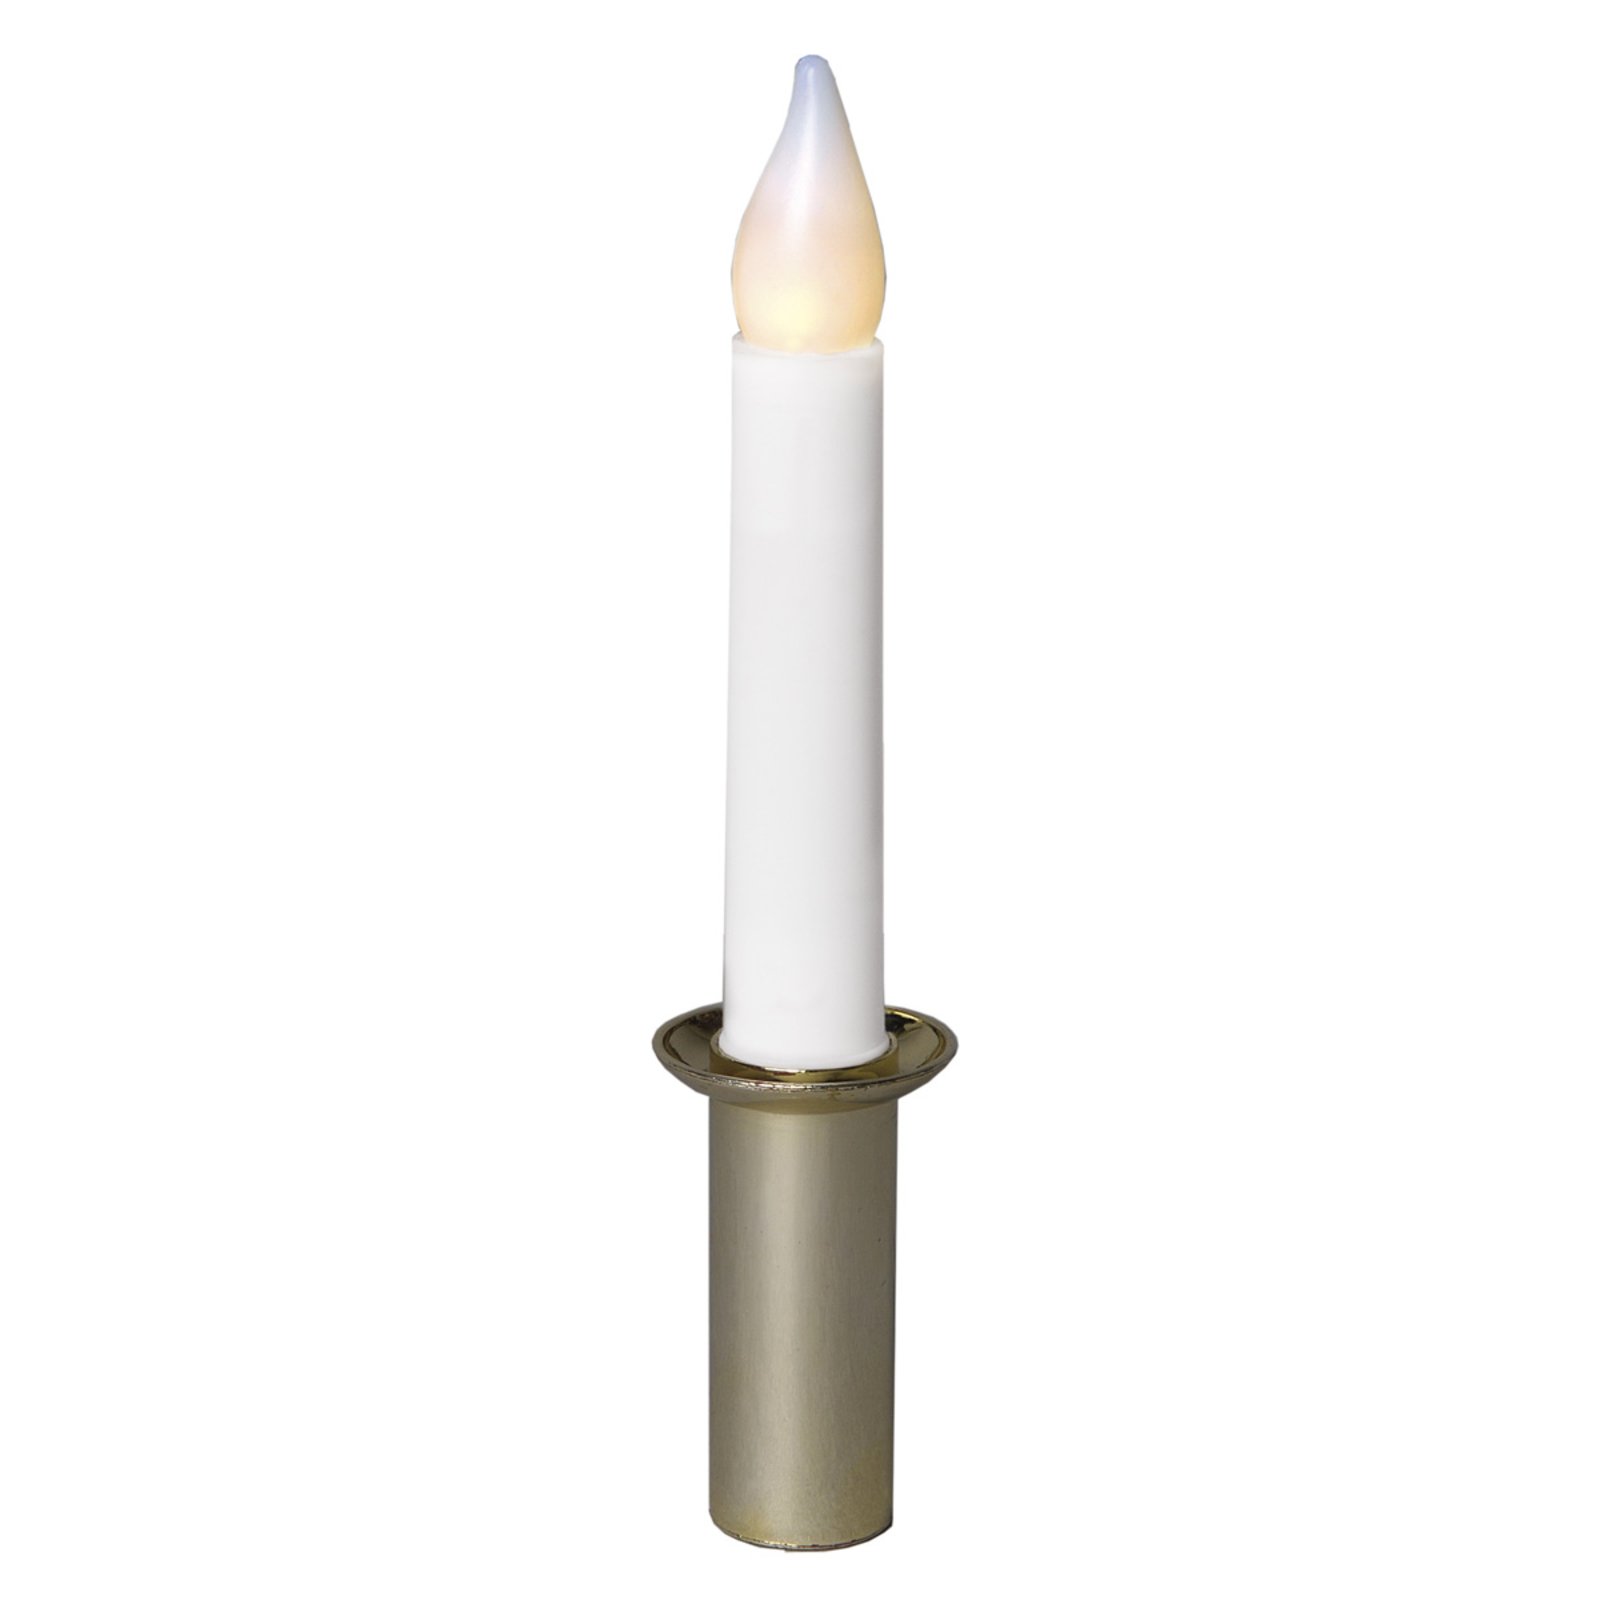 LED candle w. holder, white and gold